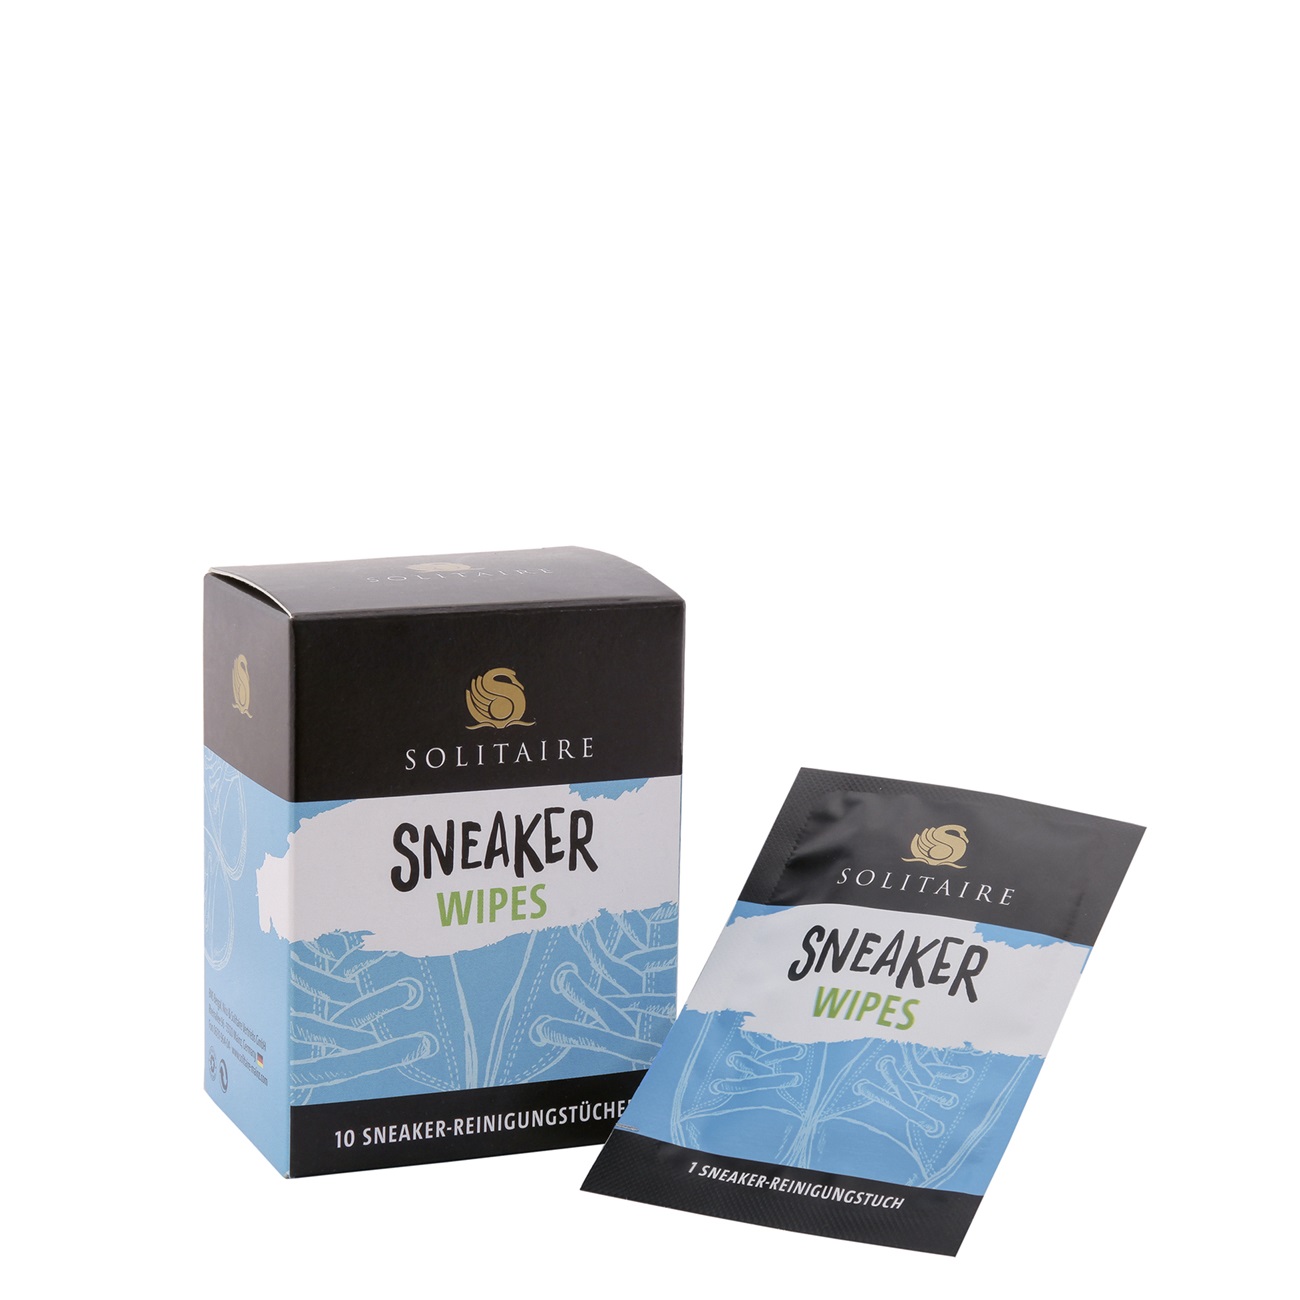 SOLITAIRE SNEAKER WIPES